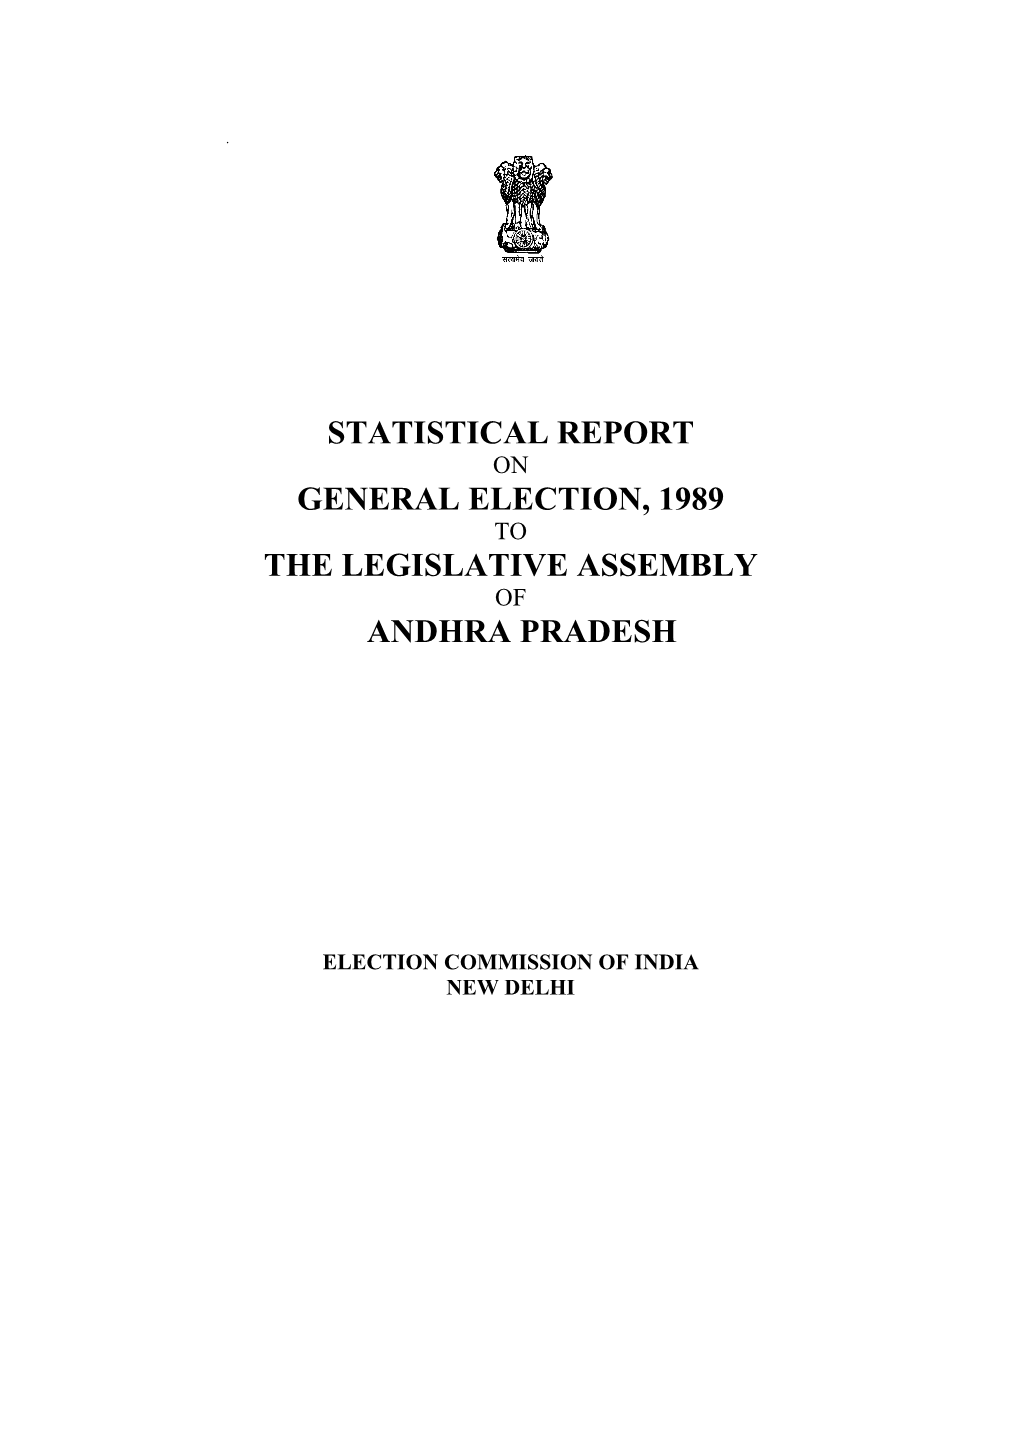 Statistical Report on General Election, 1989 to the Legislative Assembly of Andhra Pradesh